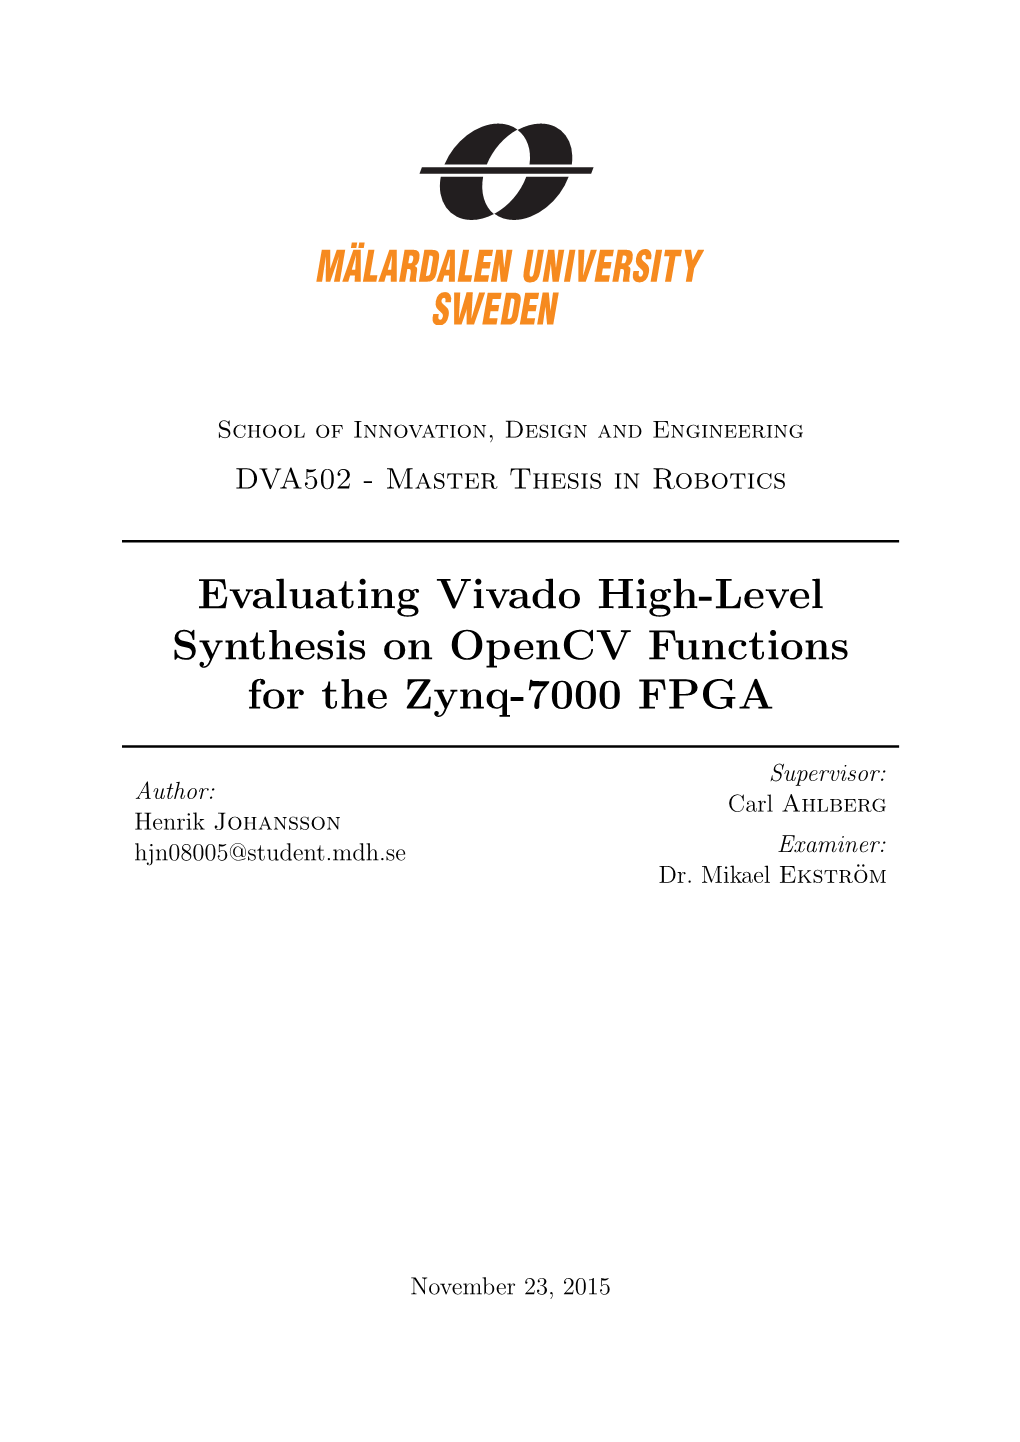 Evaluating Vivado High-Level Synthesis on Opencv Functions for the Zynq-7000 FPGA